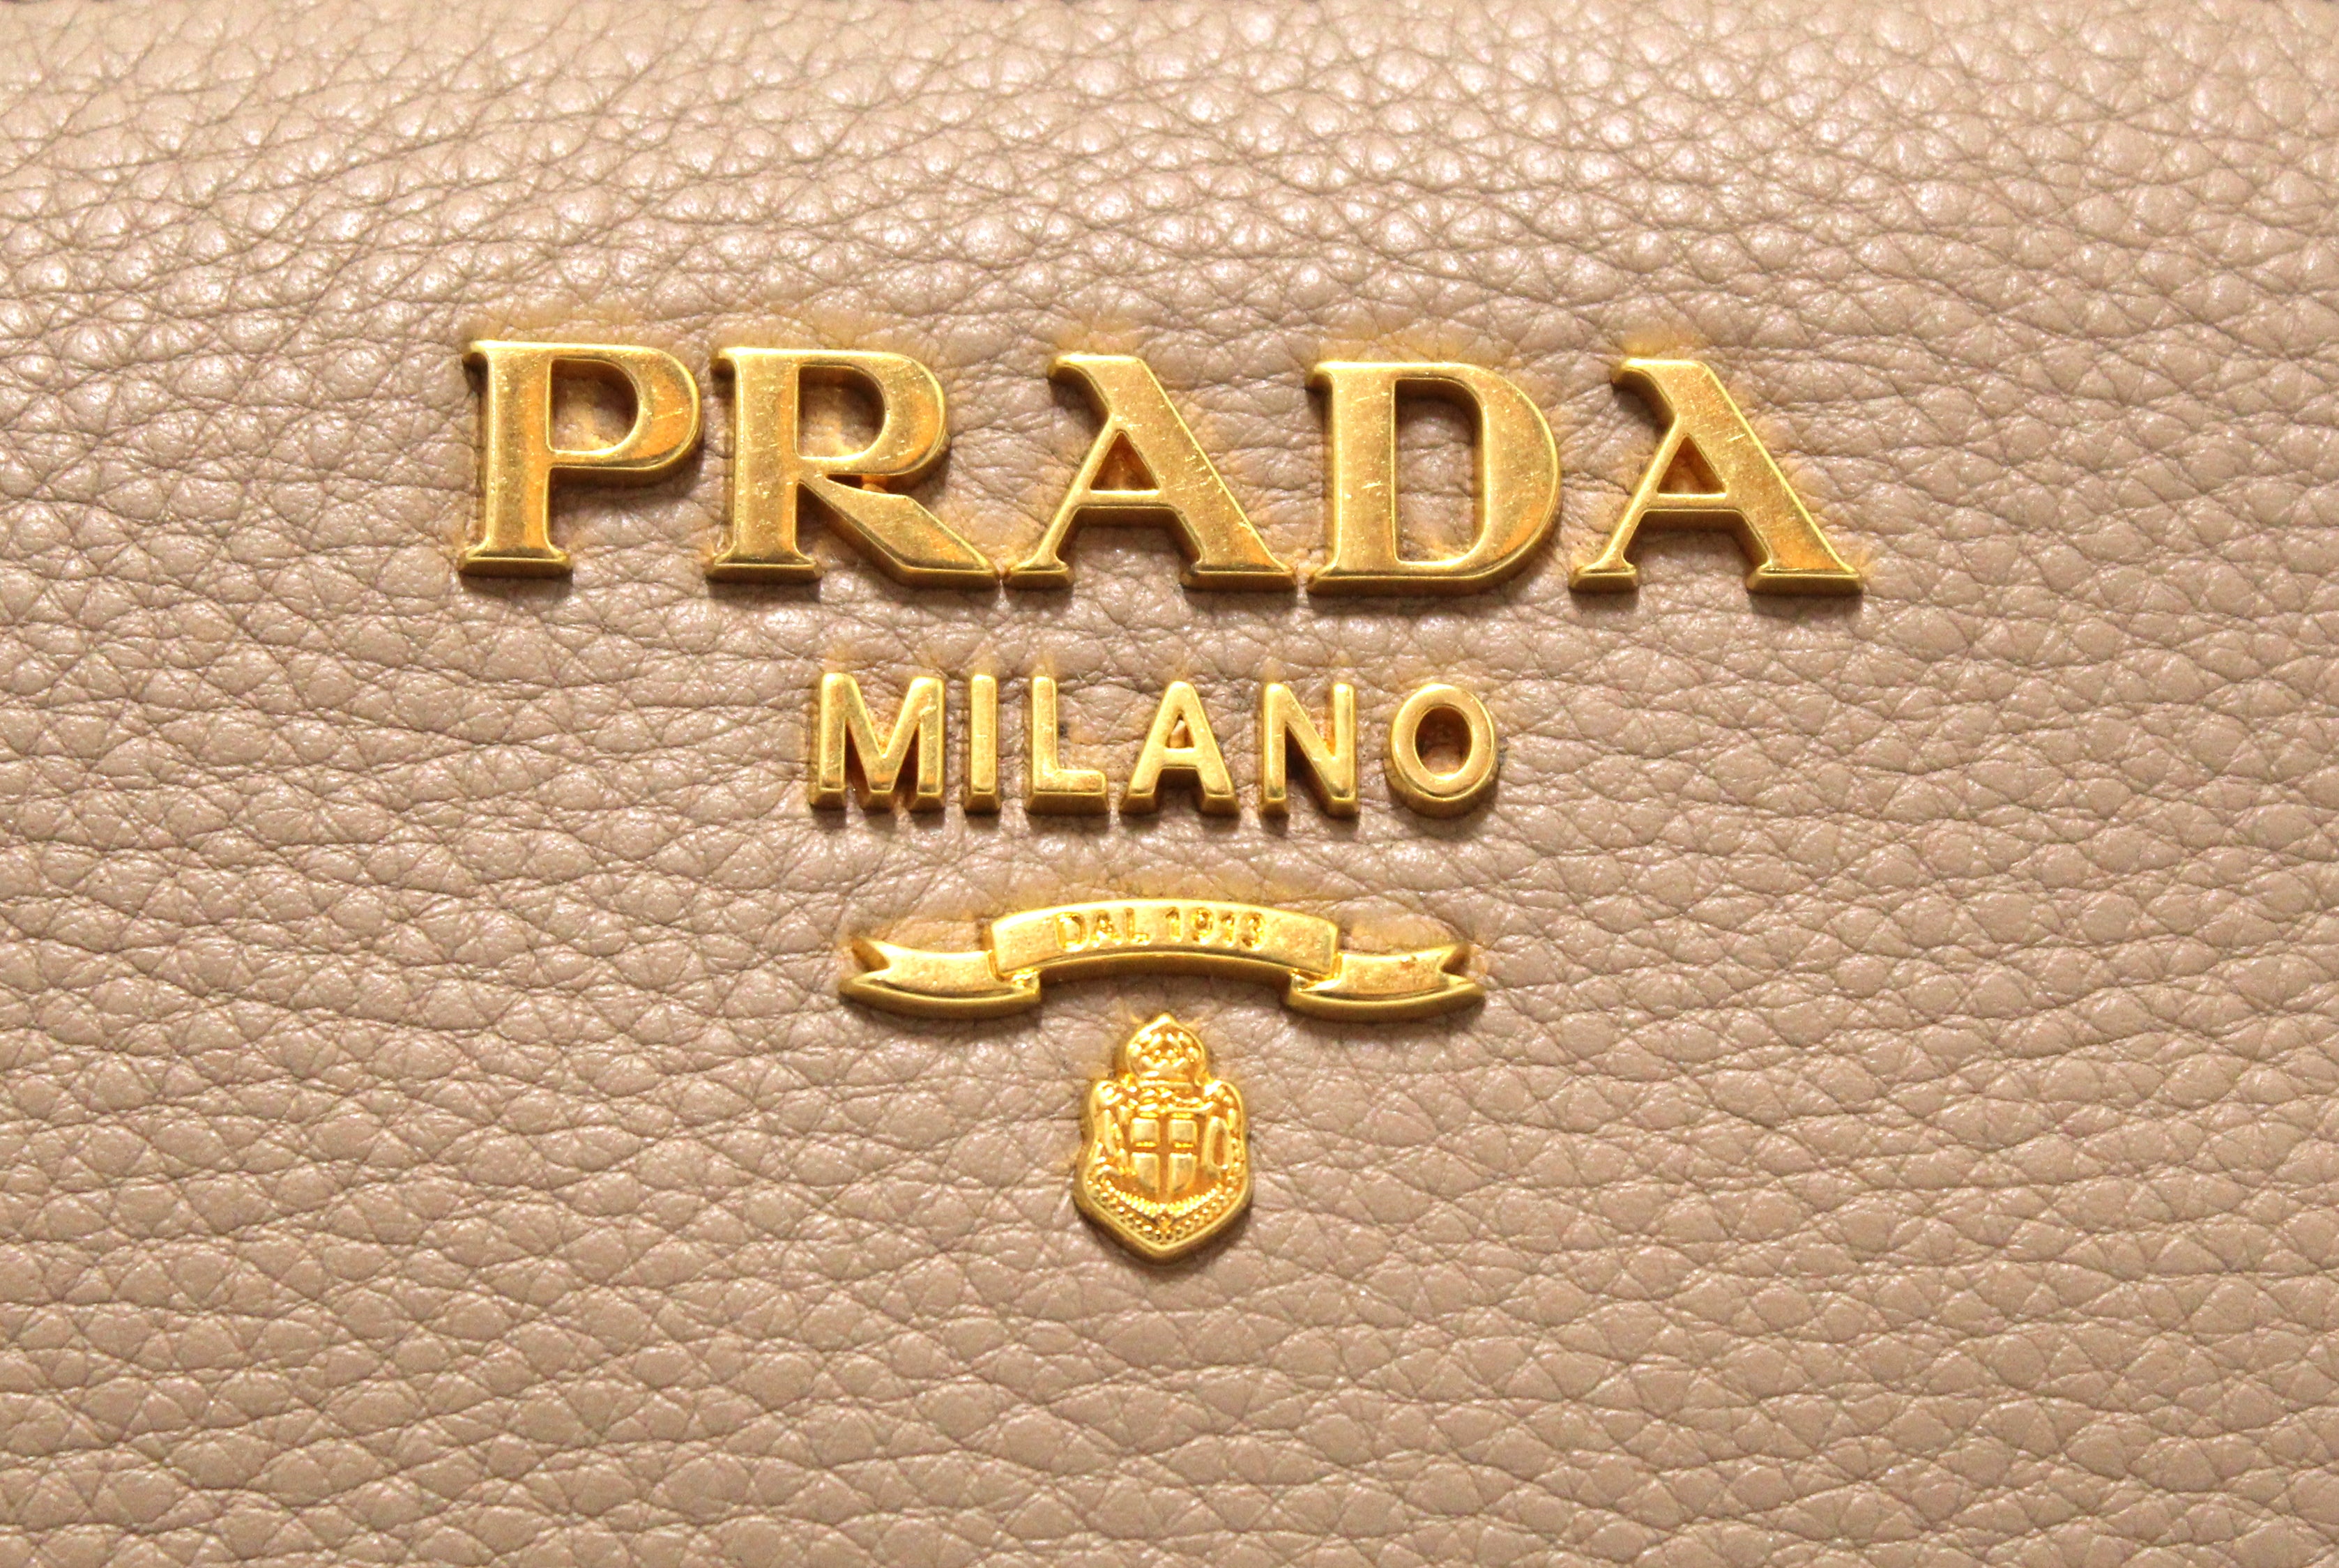 Authentic Prada Cameo Beige Calfskin Leather with Double Shoulder Bag